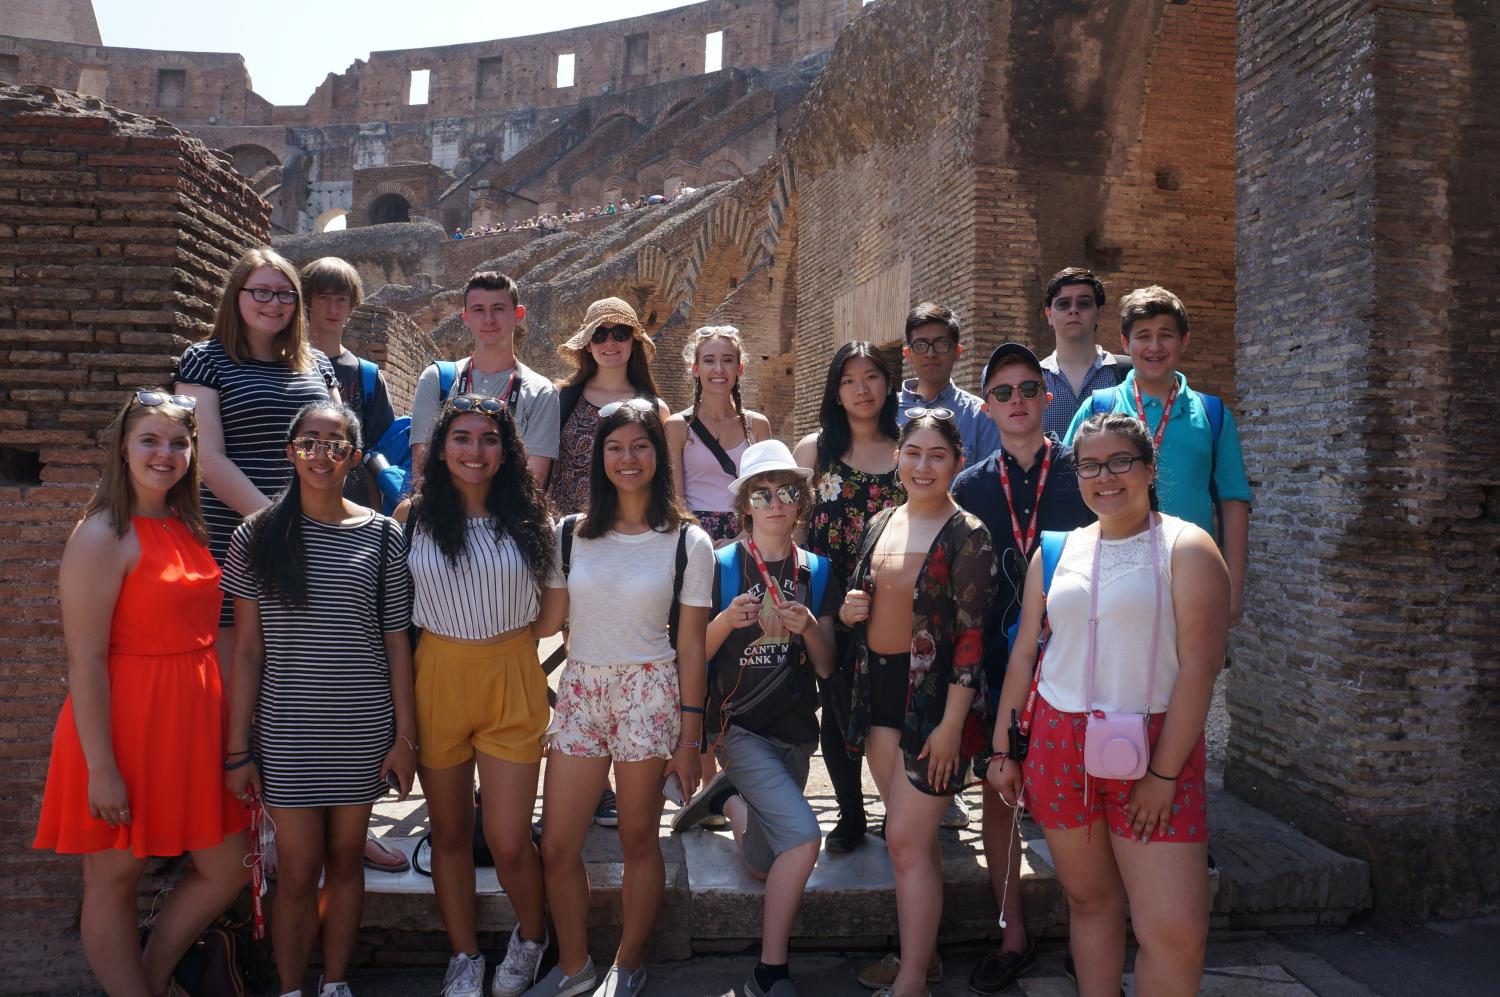 A full group photo of the students at the Colosseum in Rome, Italy.